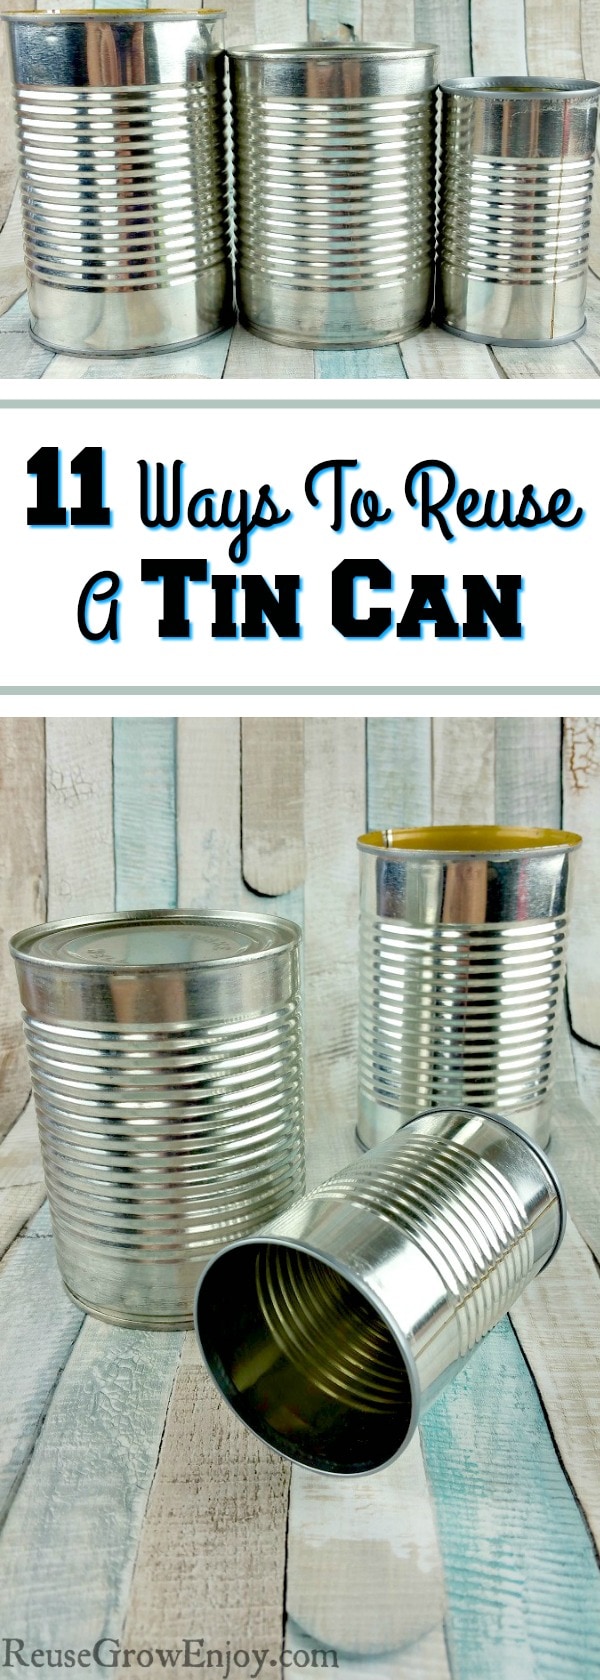 Your average can has many other uses well after we first open them. I am going to share a few ideas on how to reuse a tin can and keep it out of the trash.